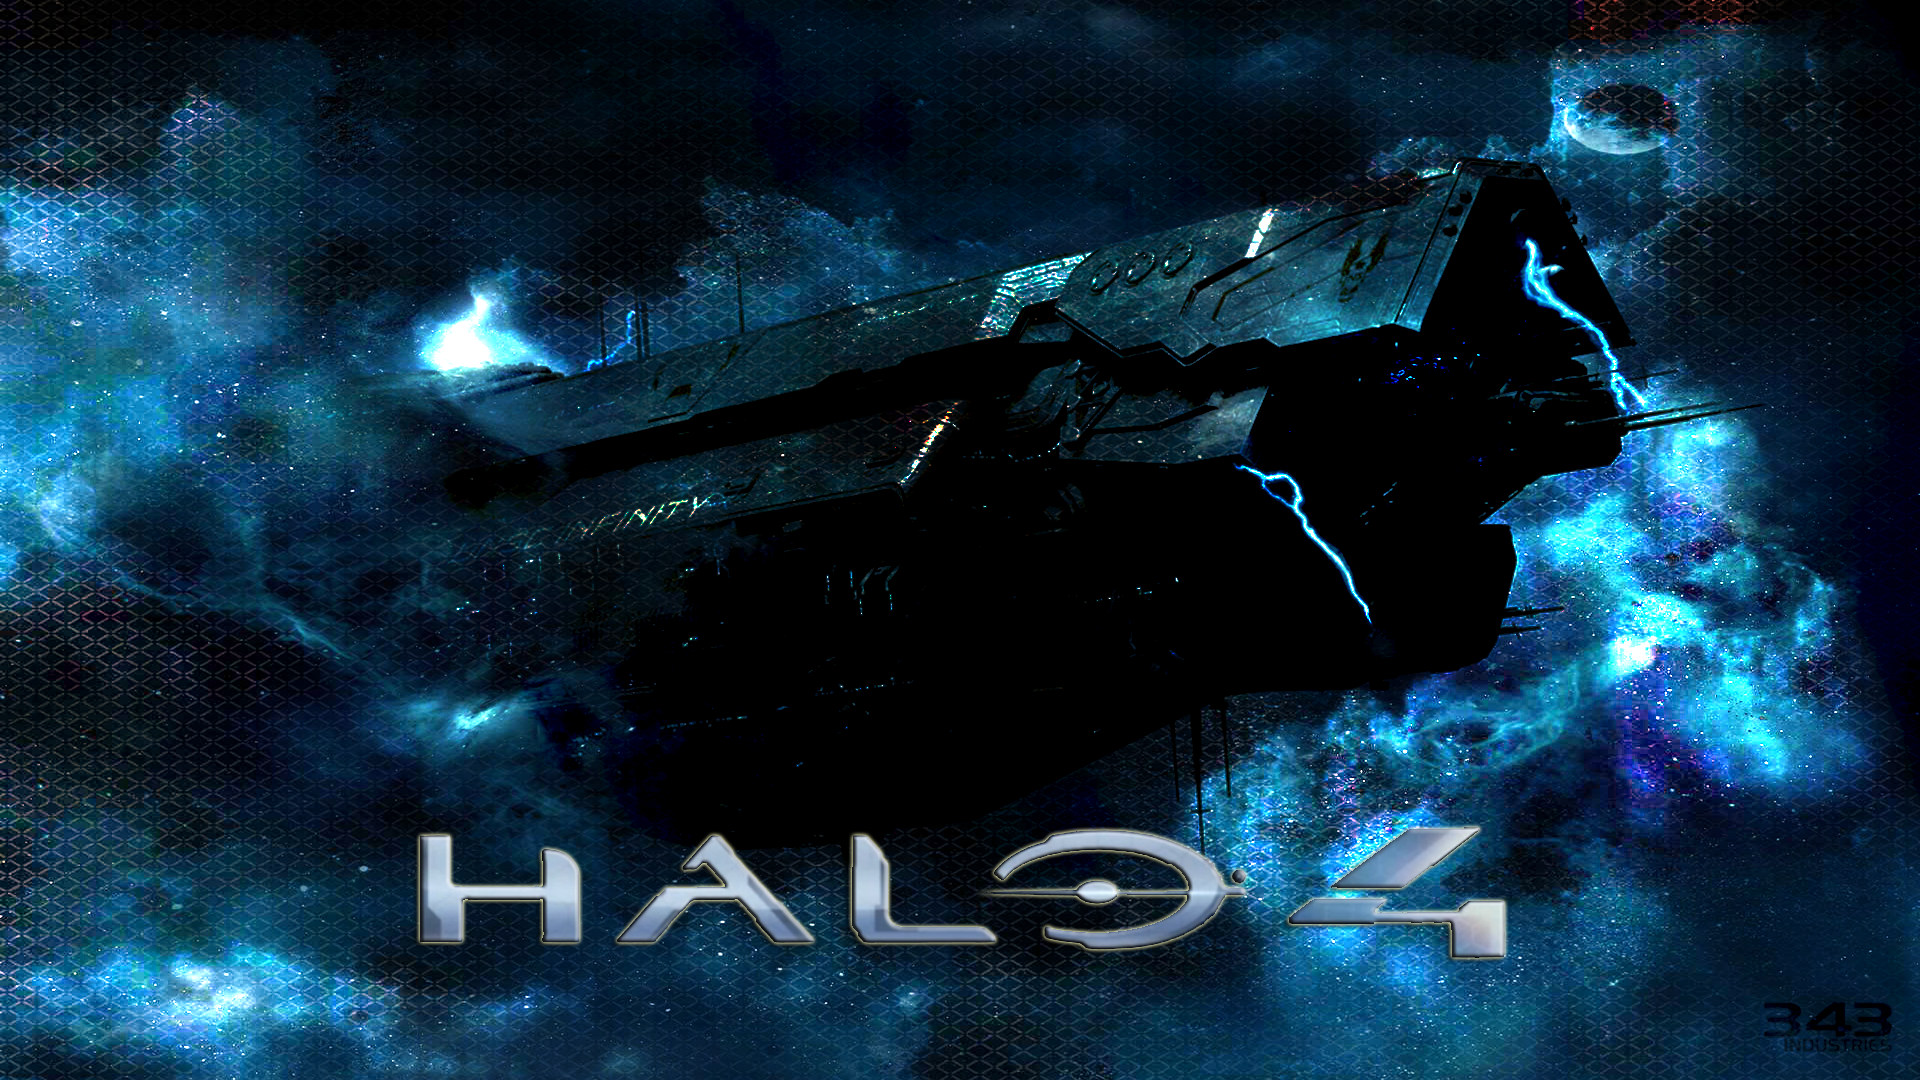 Cool Video Game Wallpaper Halowallpaper Halo Campaign X